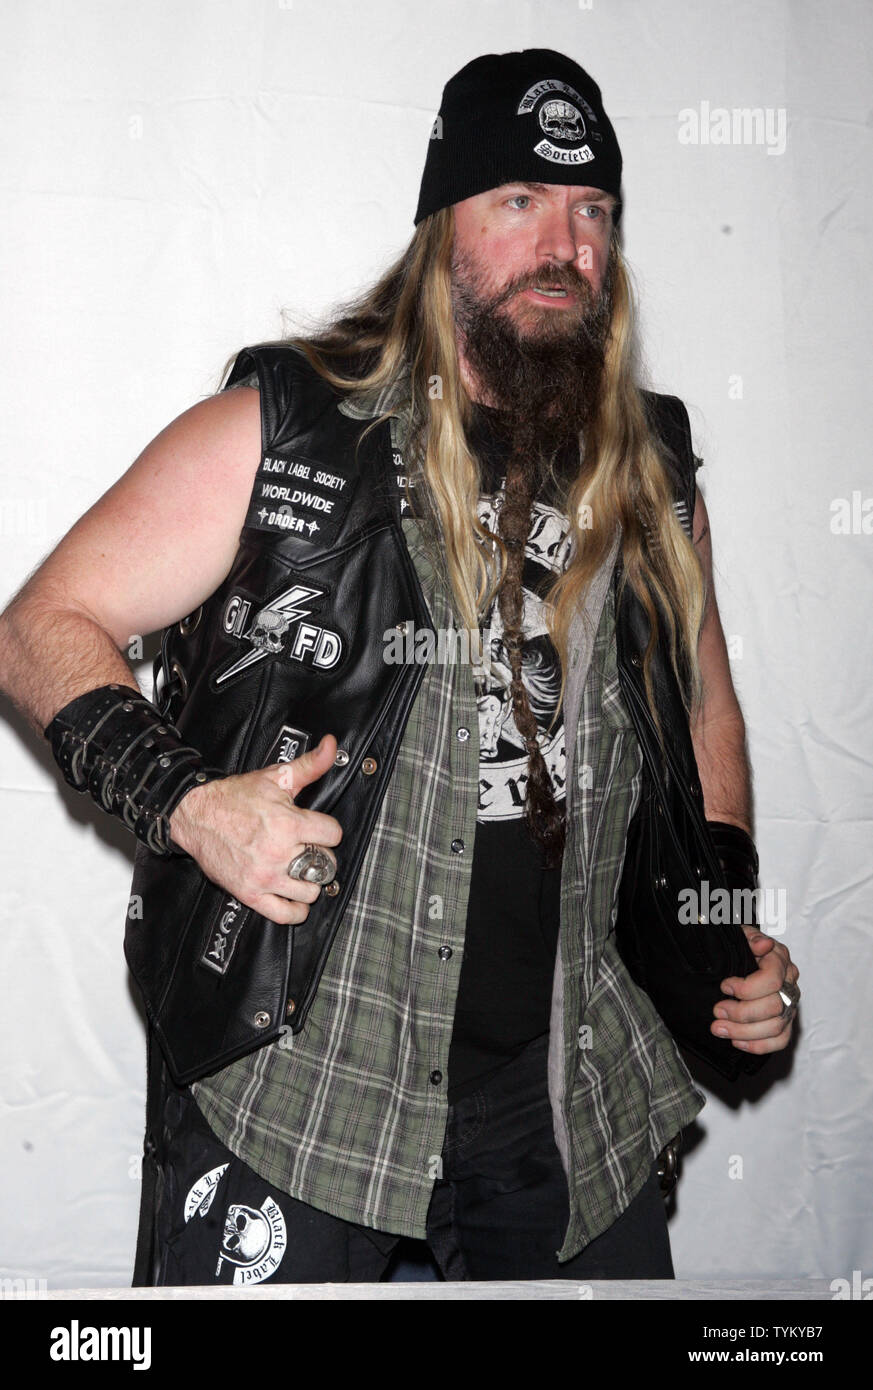 Zakk Wylde signs copies of his new album and magazine covers at Hudson News  in Grand Central Station in New York on August 20, 2010. UPI /Laura  Cavanaugh Stock Photo - Alamy